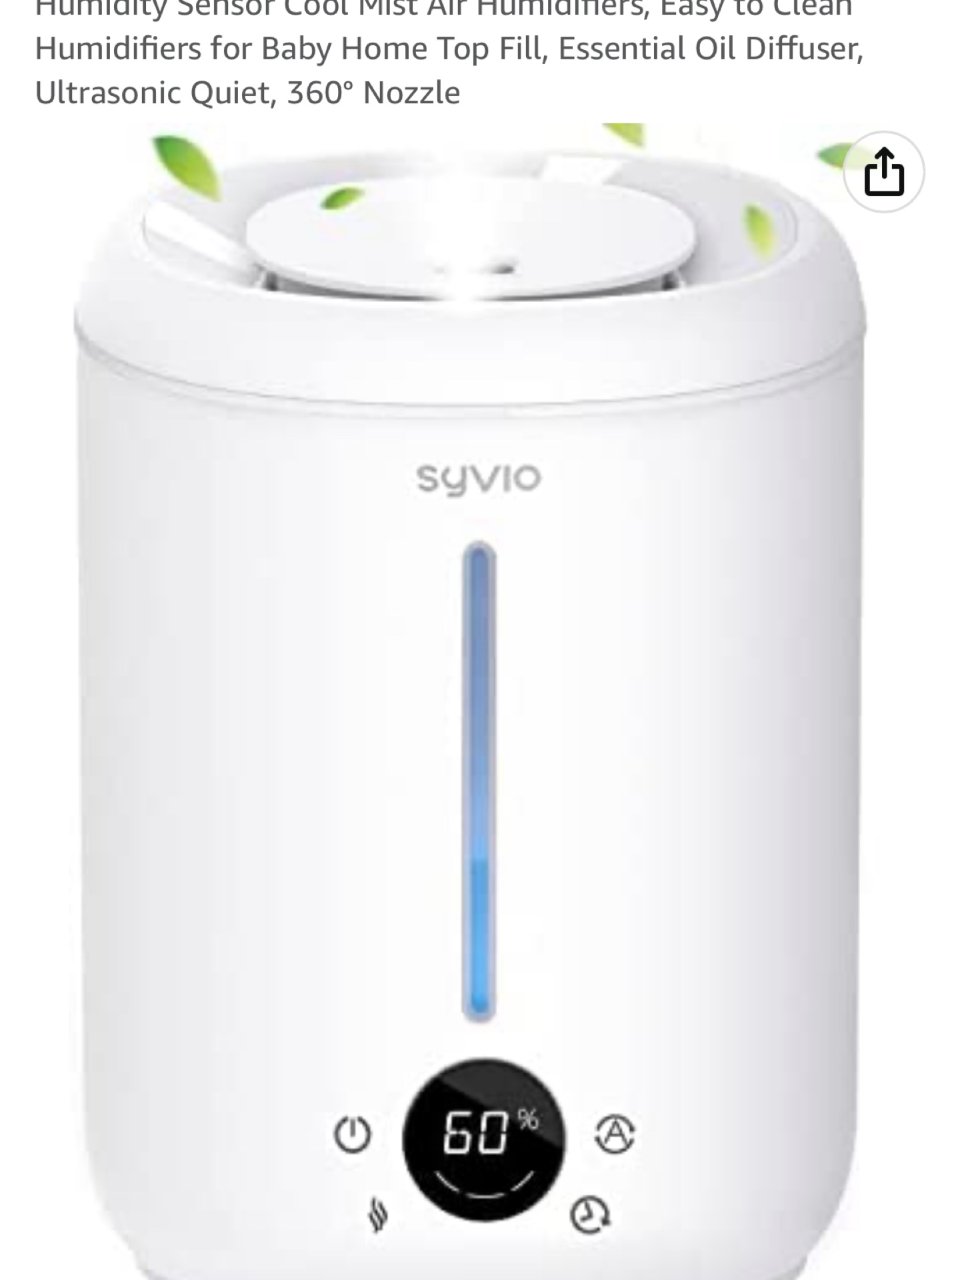 Humidifiers for Bedroom Large Room, Syvio 2.8L Smart Humidity Sensor Cool Mist Air Humidifiers, Easy to Clean Humidifiers for Baby Home Top Fill, Essential Oil Diffuser, Ultrasonic Quiet, 360° Nozzle : Home & Kitchen